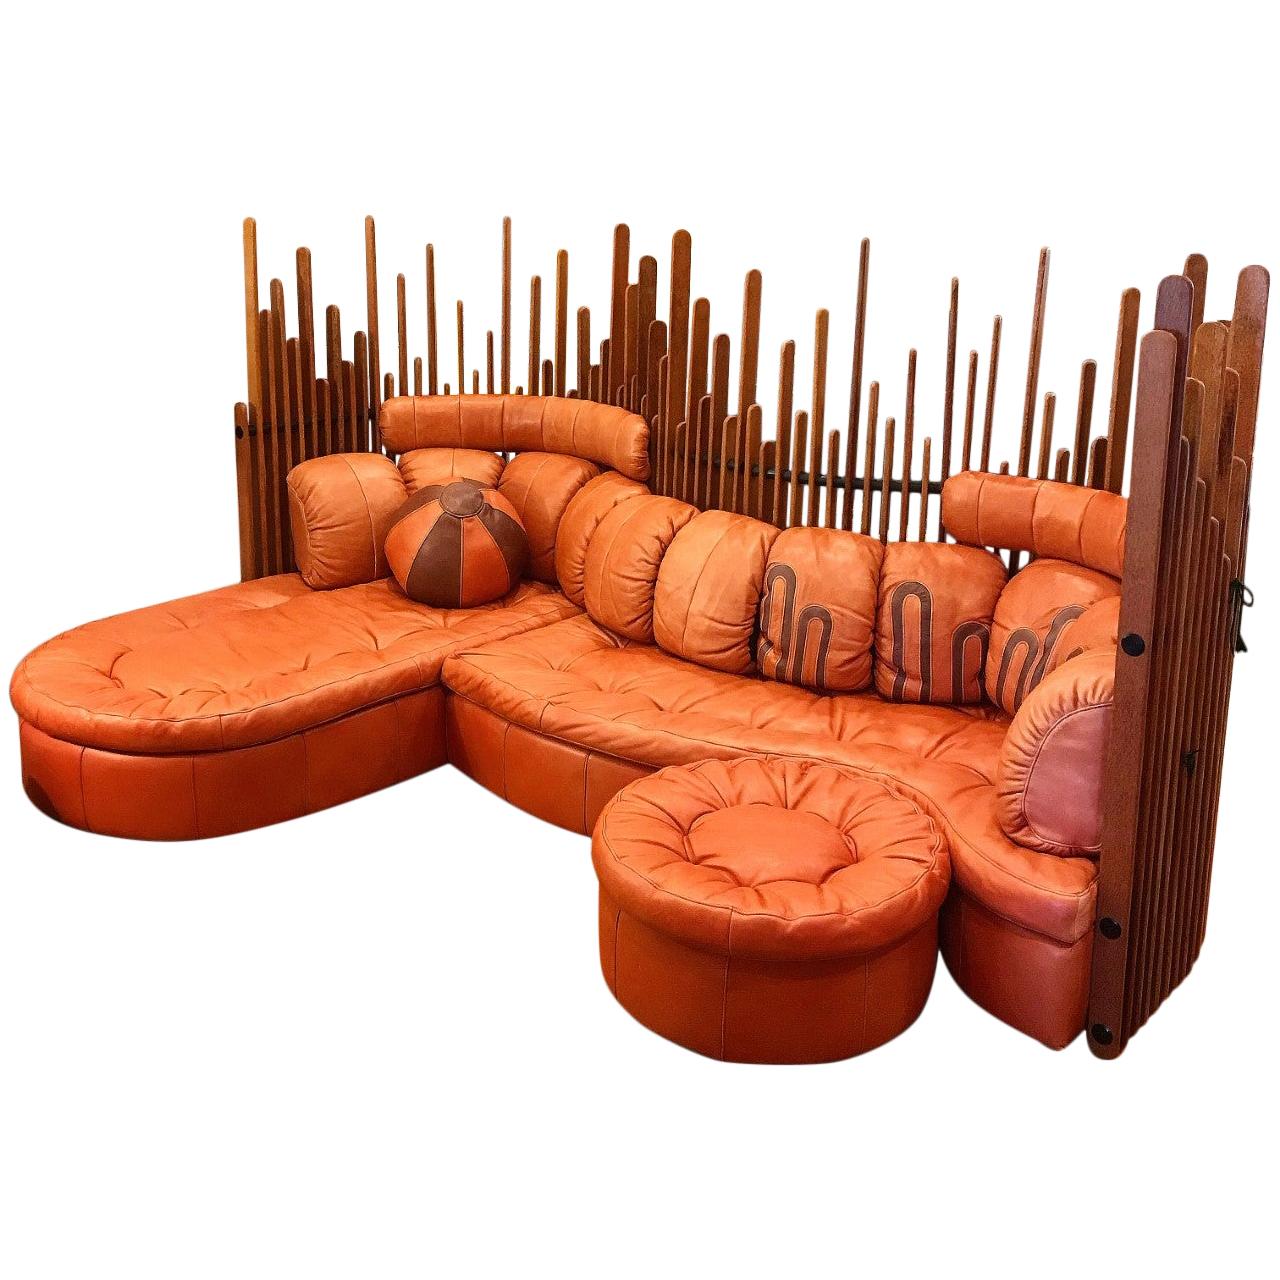 Stunning centerpiece for your home. The Isle D’Palm modular with its undulating shape and deep cushioning will become your favorite spot to rest and relax. 3 seating pieces that group together. The wooden spines that ring the back of the sofa are